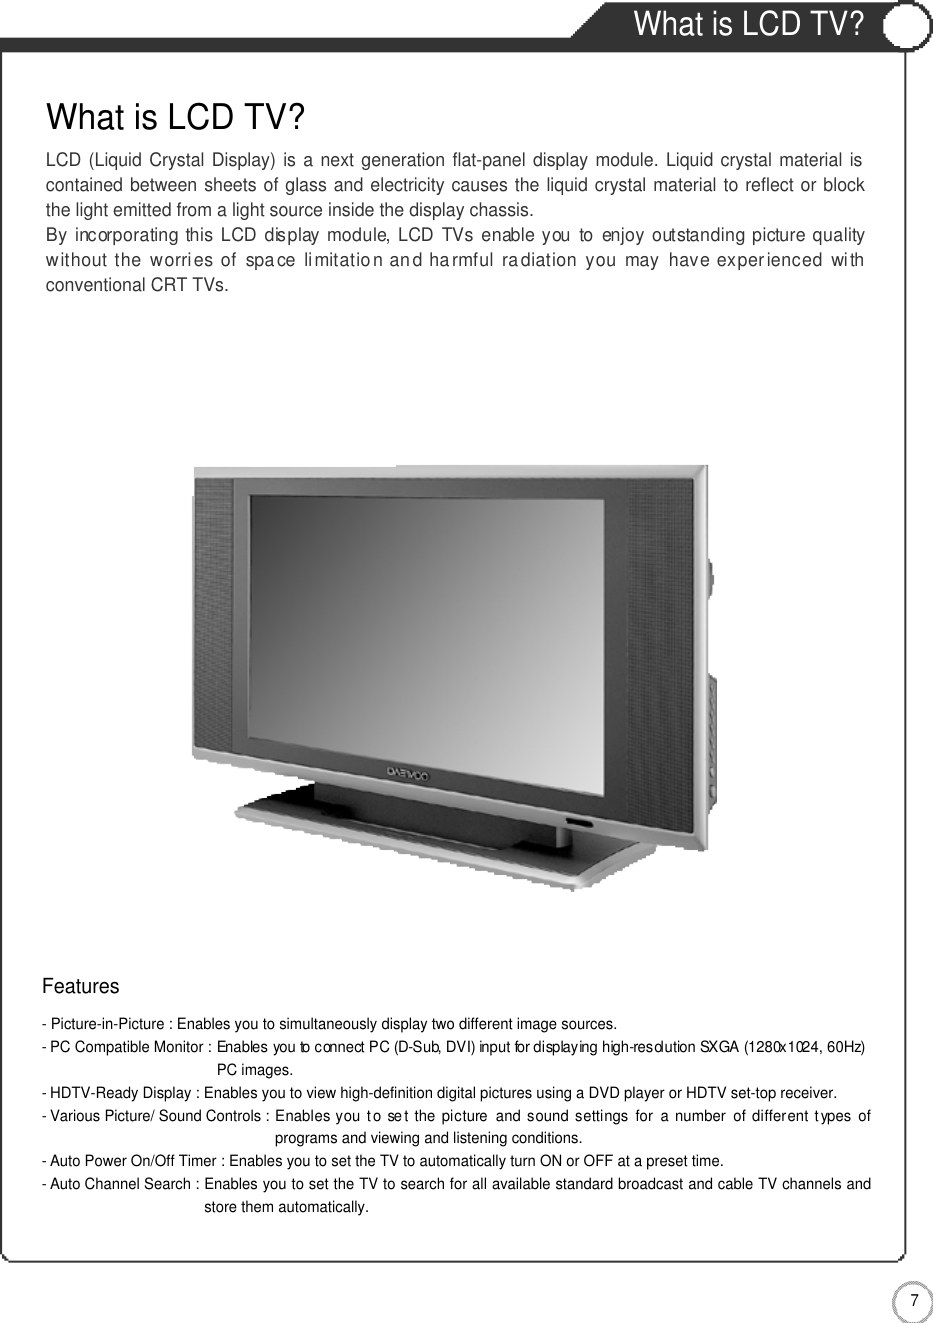 What is LCD TV?7User Guidance InformationWhat is LCD TV?LCD (Liquid Crystal Display) is a next generation flat-panel display module. Liquid crystal material iscontained between sheets of glass and electricity causes the liquid crystal material to reflect or blockthe light emitted from a light source inside the display chassis.By  incorporating  this  LCD  display module, LCD TVs  enable you  to  enjoy  outstanding  picture qualitywithout the worri es  of  spa ce  limitatio n an d harmful ra diation you  may  have experienced  withconventional CRT TVs.Features- Picture-in-Picture : Enables you to simultaneously display two different image sources.- PC Compatible Monitor : Enables you to connect PC (D-Sub, DVI) input for displaying high-resolution SXGA (1280x1024, 60Hz)PC images.-HDTV-Ready Display : Enables you to view high-definition digital pictures using a DVD player or HDTV set-top receiver.- Various Picture/ Sound Controls : Enables  you t o  se t  the  picture  and sound settings  for a  number of different  t ypes ofprograms and viewing and listening conditions.- Auto Power On/Off Timer : Enables you to set the TV to automatically turn ON or OFF at a preset time.- Auto Channel Search : Enables you to set the TV to search for all available standard broadcast and cable TV channels andstore them automatically.